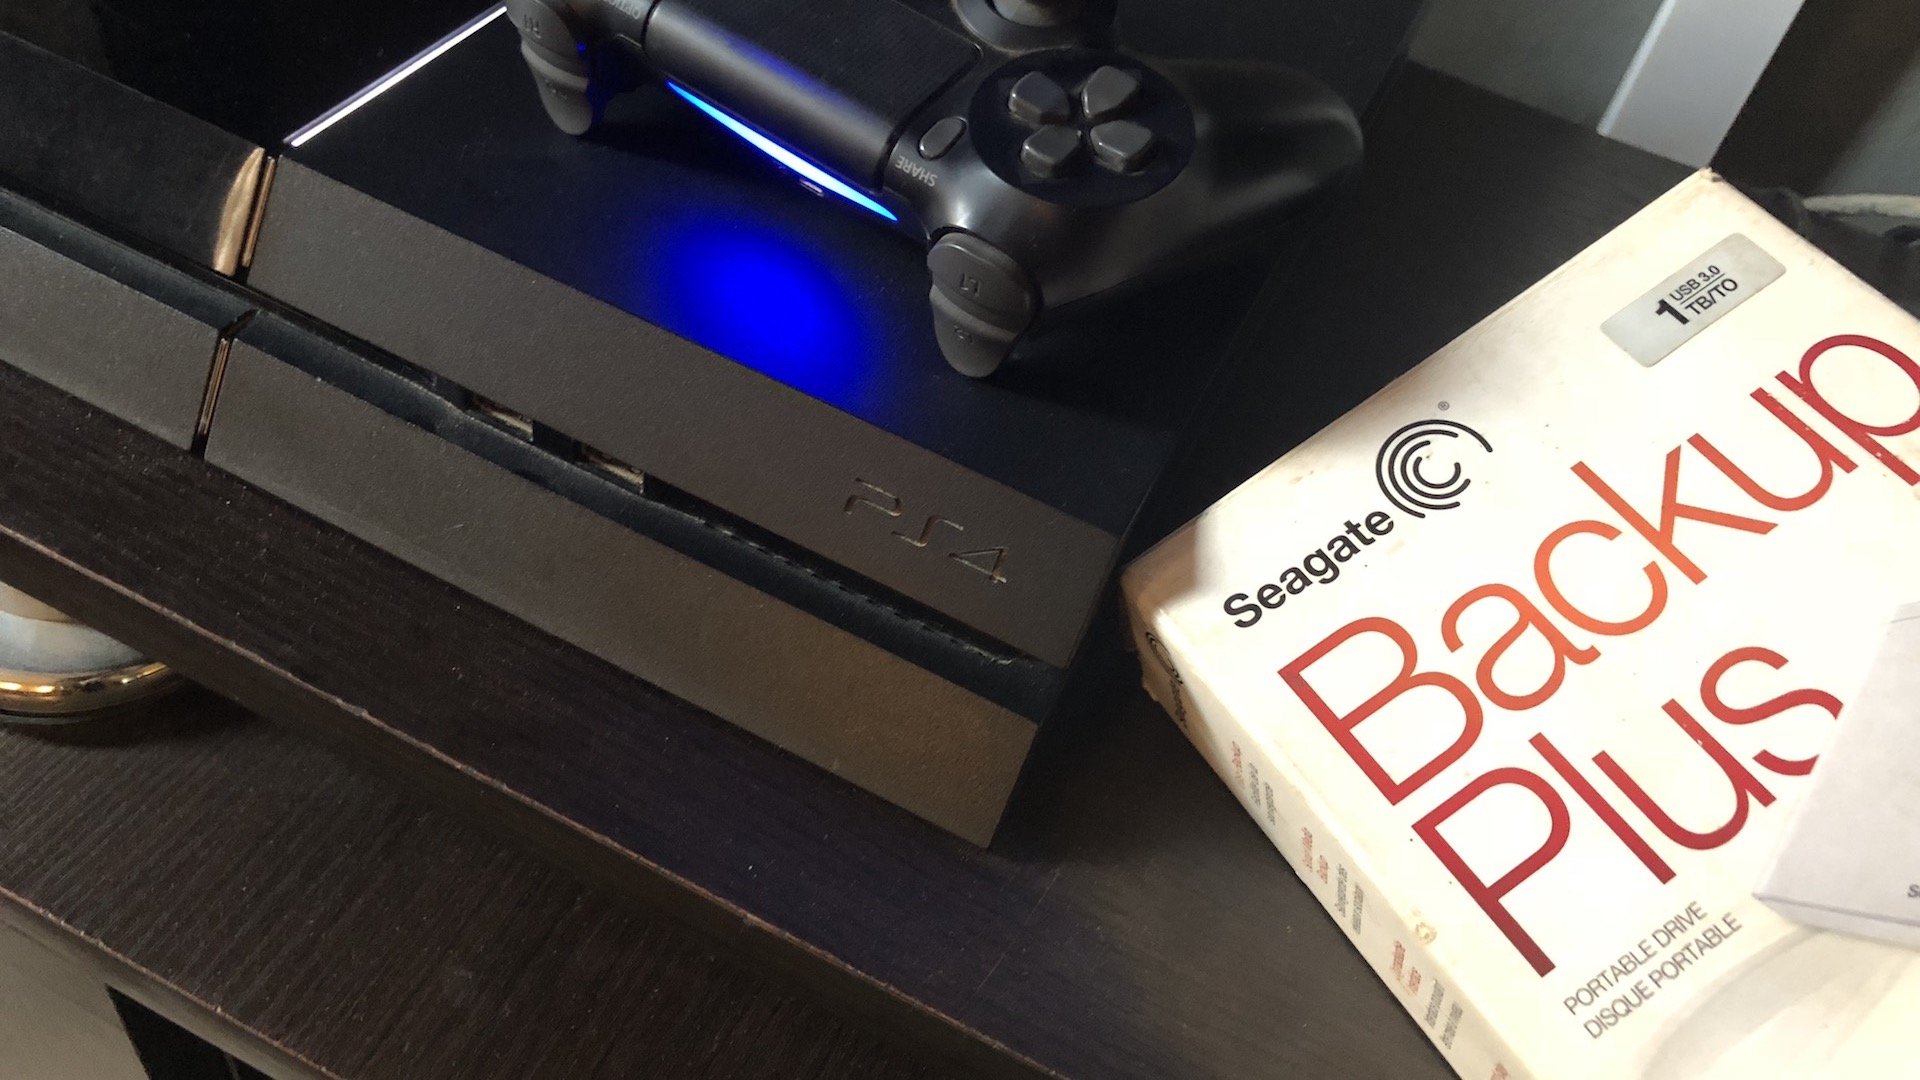 Replace Your PS4 500GB Hard Drive With Your 1TB Seagate Backup Drive